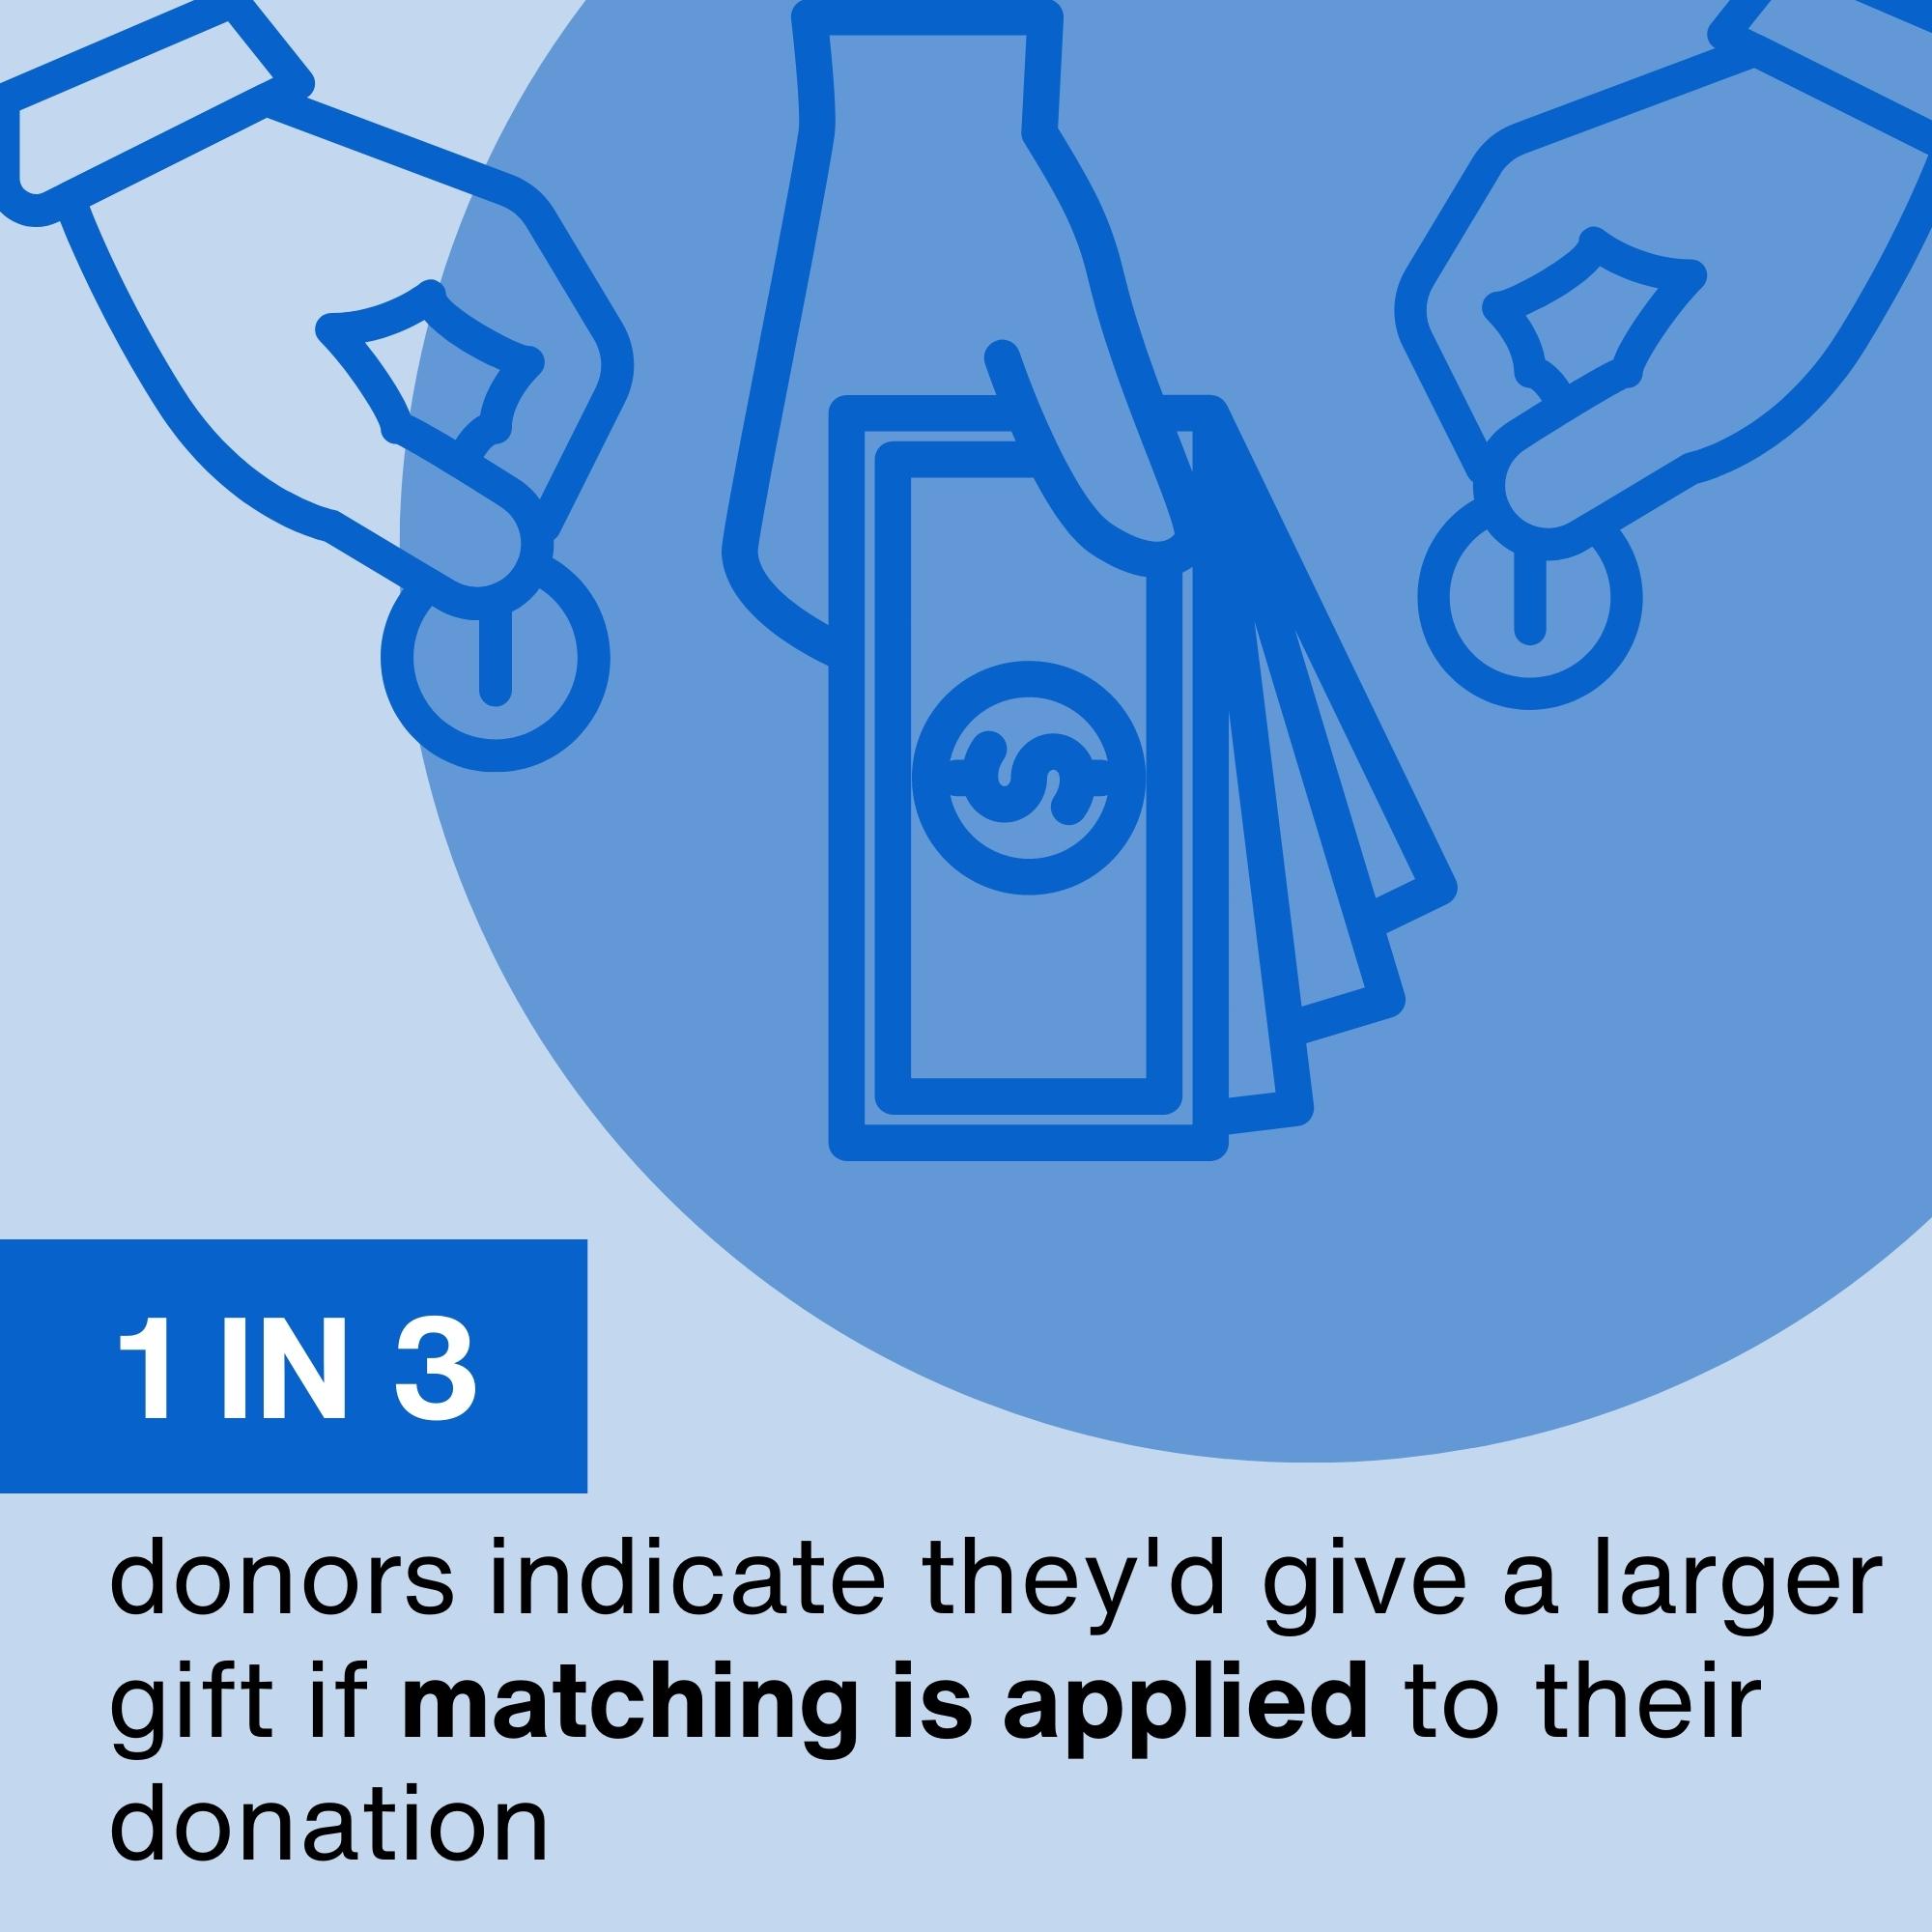 1 in 3 donors indicate they'd give a larger gift if matching is applied to their donation